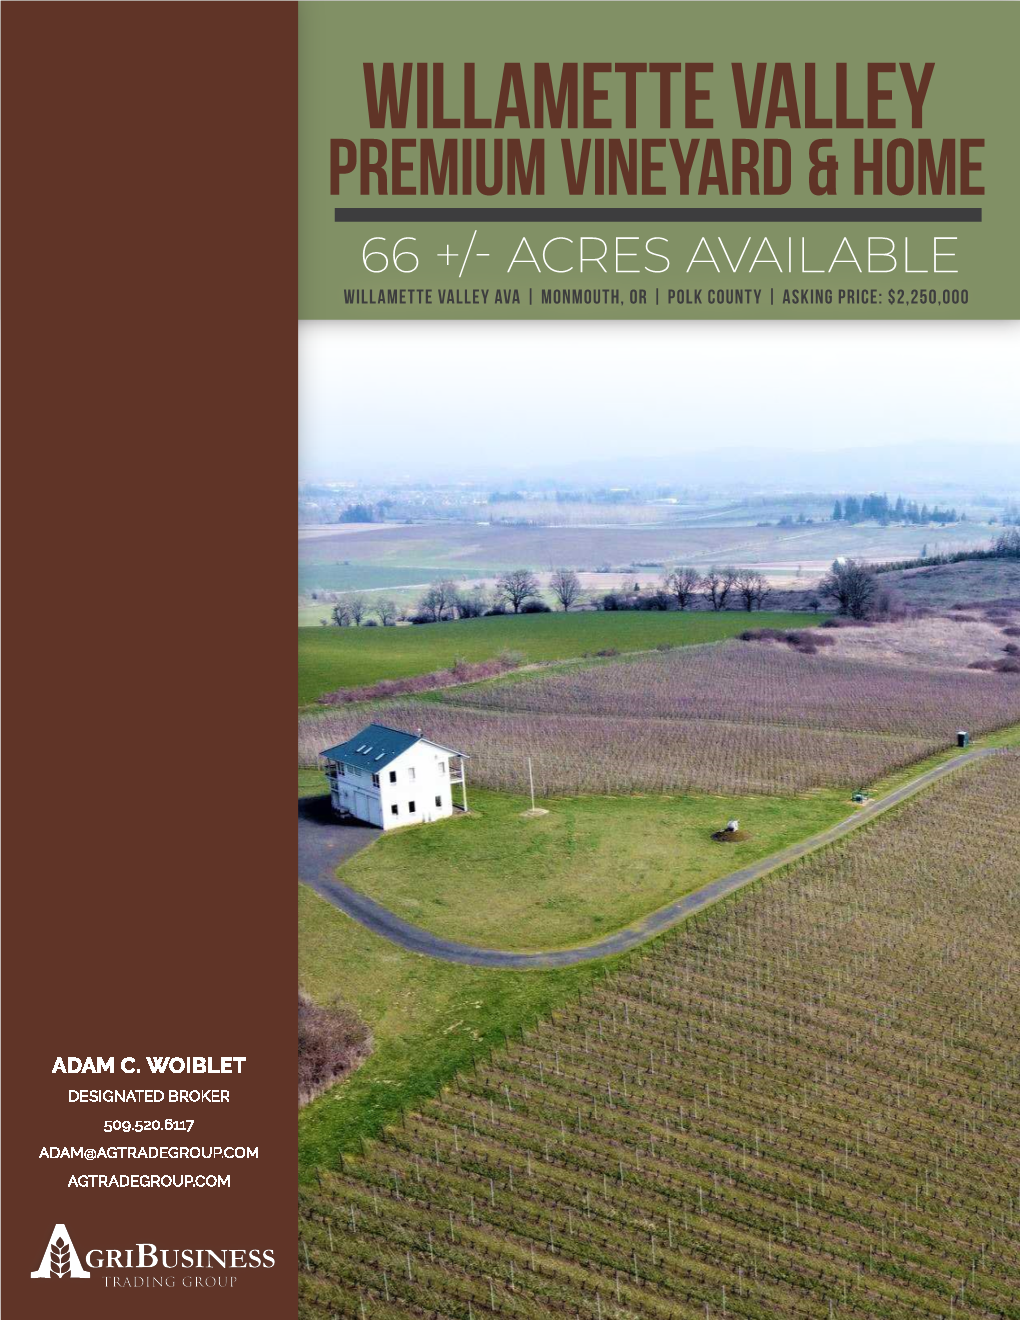 Willamette Valley Premium Vineyard & Home 66 +/- Acres Available Willamette Valley Ava | Monmouth, Or | Polk County | Asking Price: $2,250,000